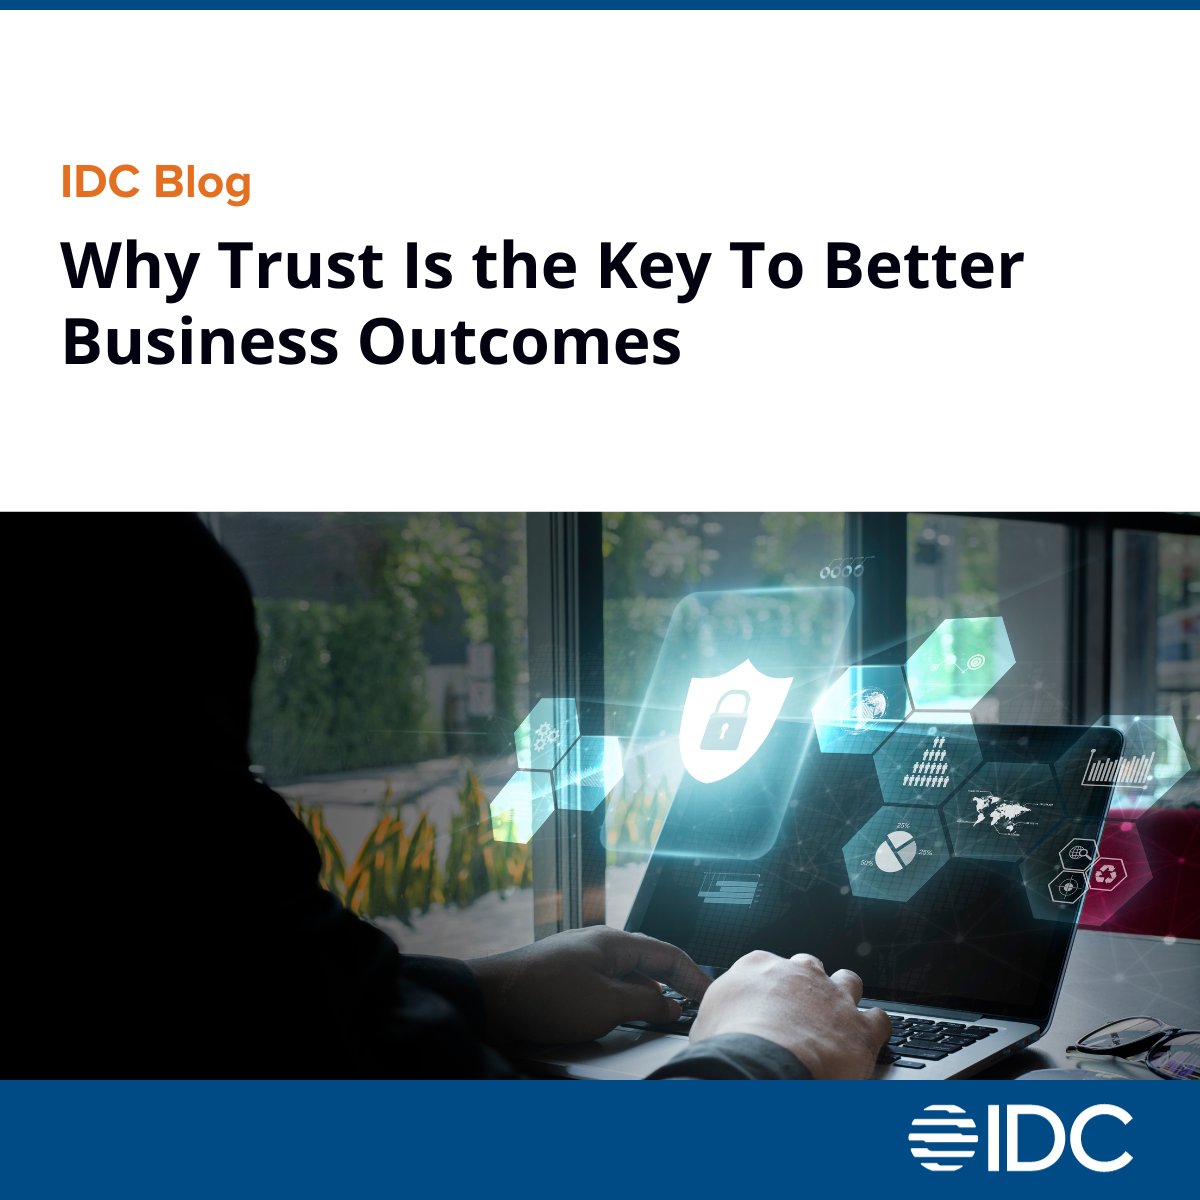 Not only does trust facilitate efficient operations but it is a must in getting individuals to share personal information. Personal information you need to build loyalty and business resilience. #futureoftrust bit.ly/3G63vPQ